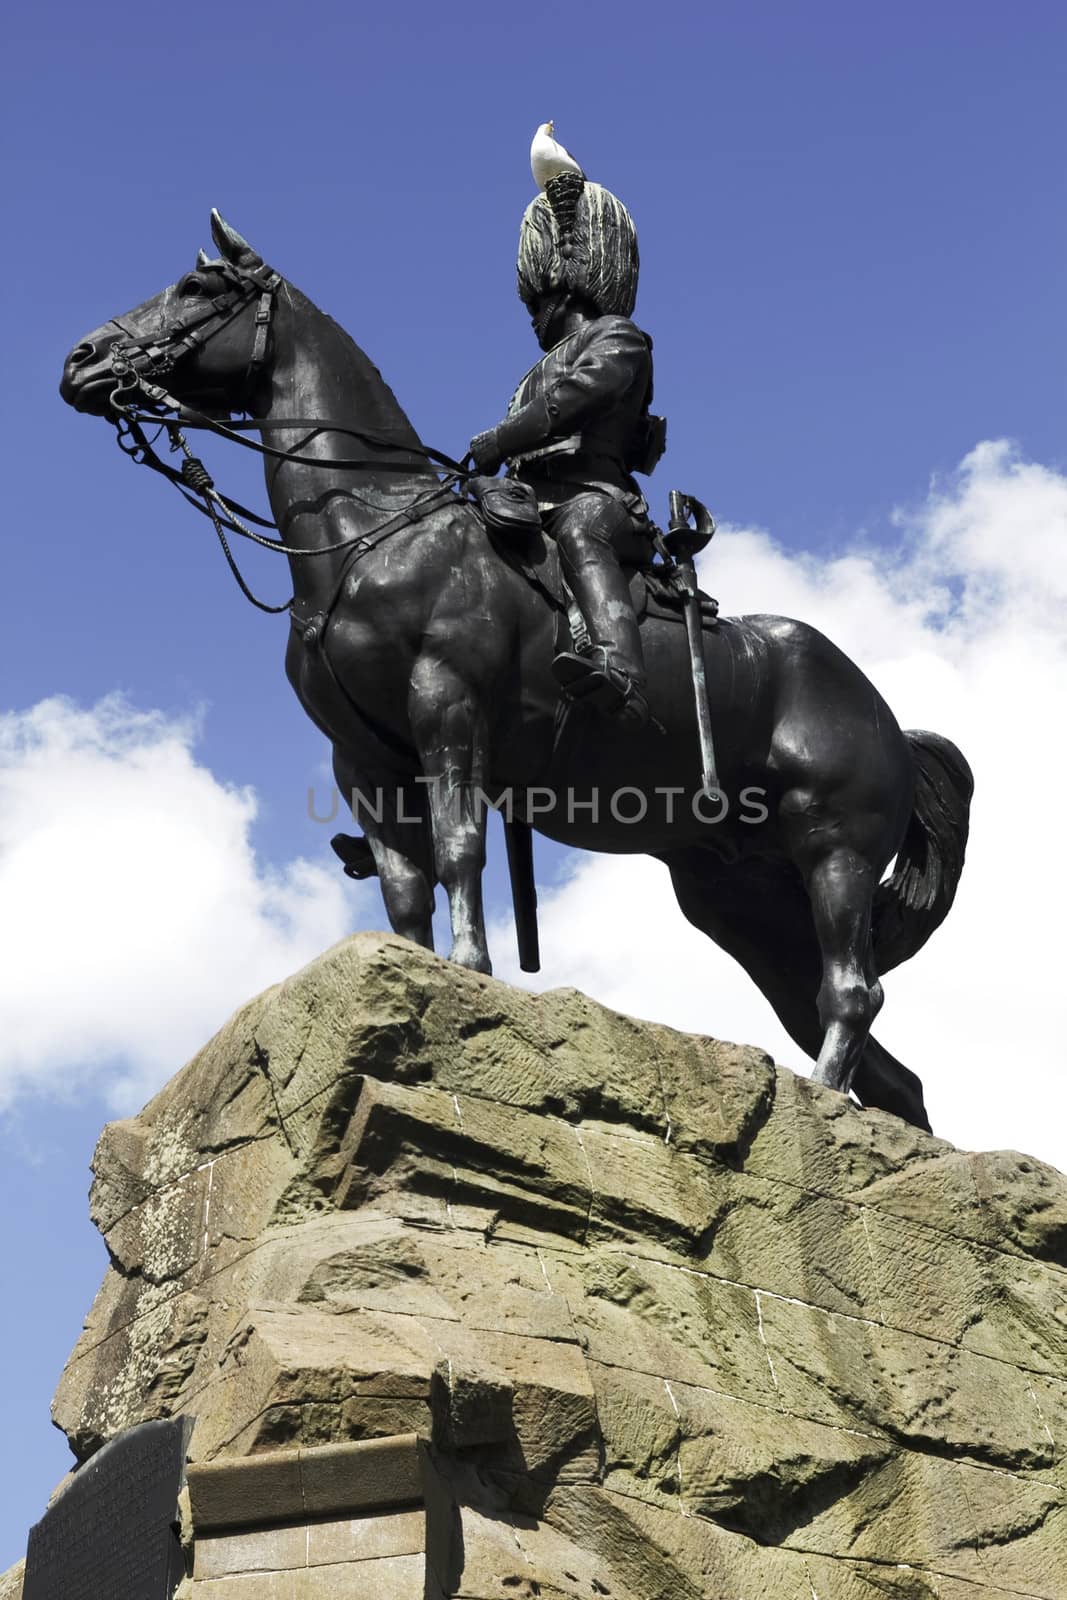 The monument to commemorate the Royal Scots Greys who fought in the second Boer War in South Africa in 1899. The statue is in Princes Street Gardens, Edinburgh. The sculptor was Birnie Rhind, and it was unveiled on 16th November 1906.